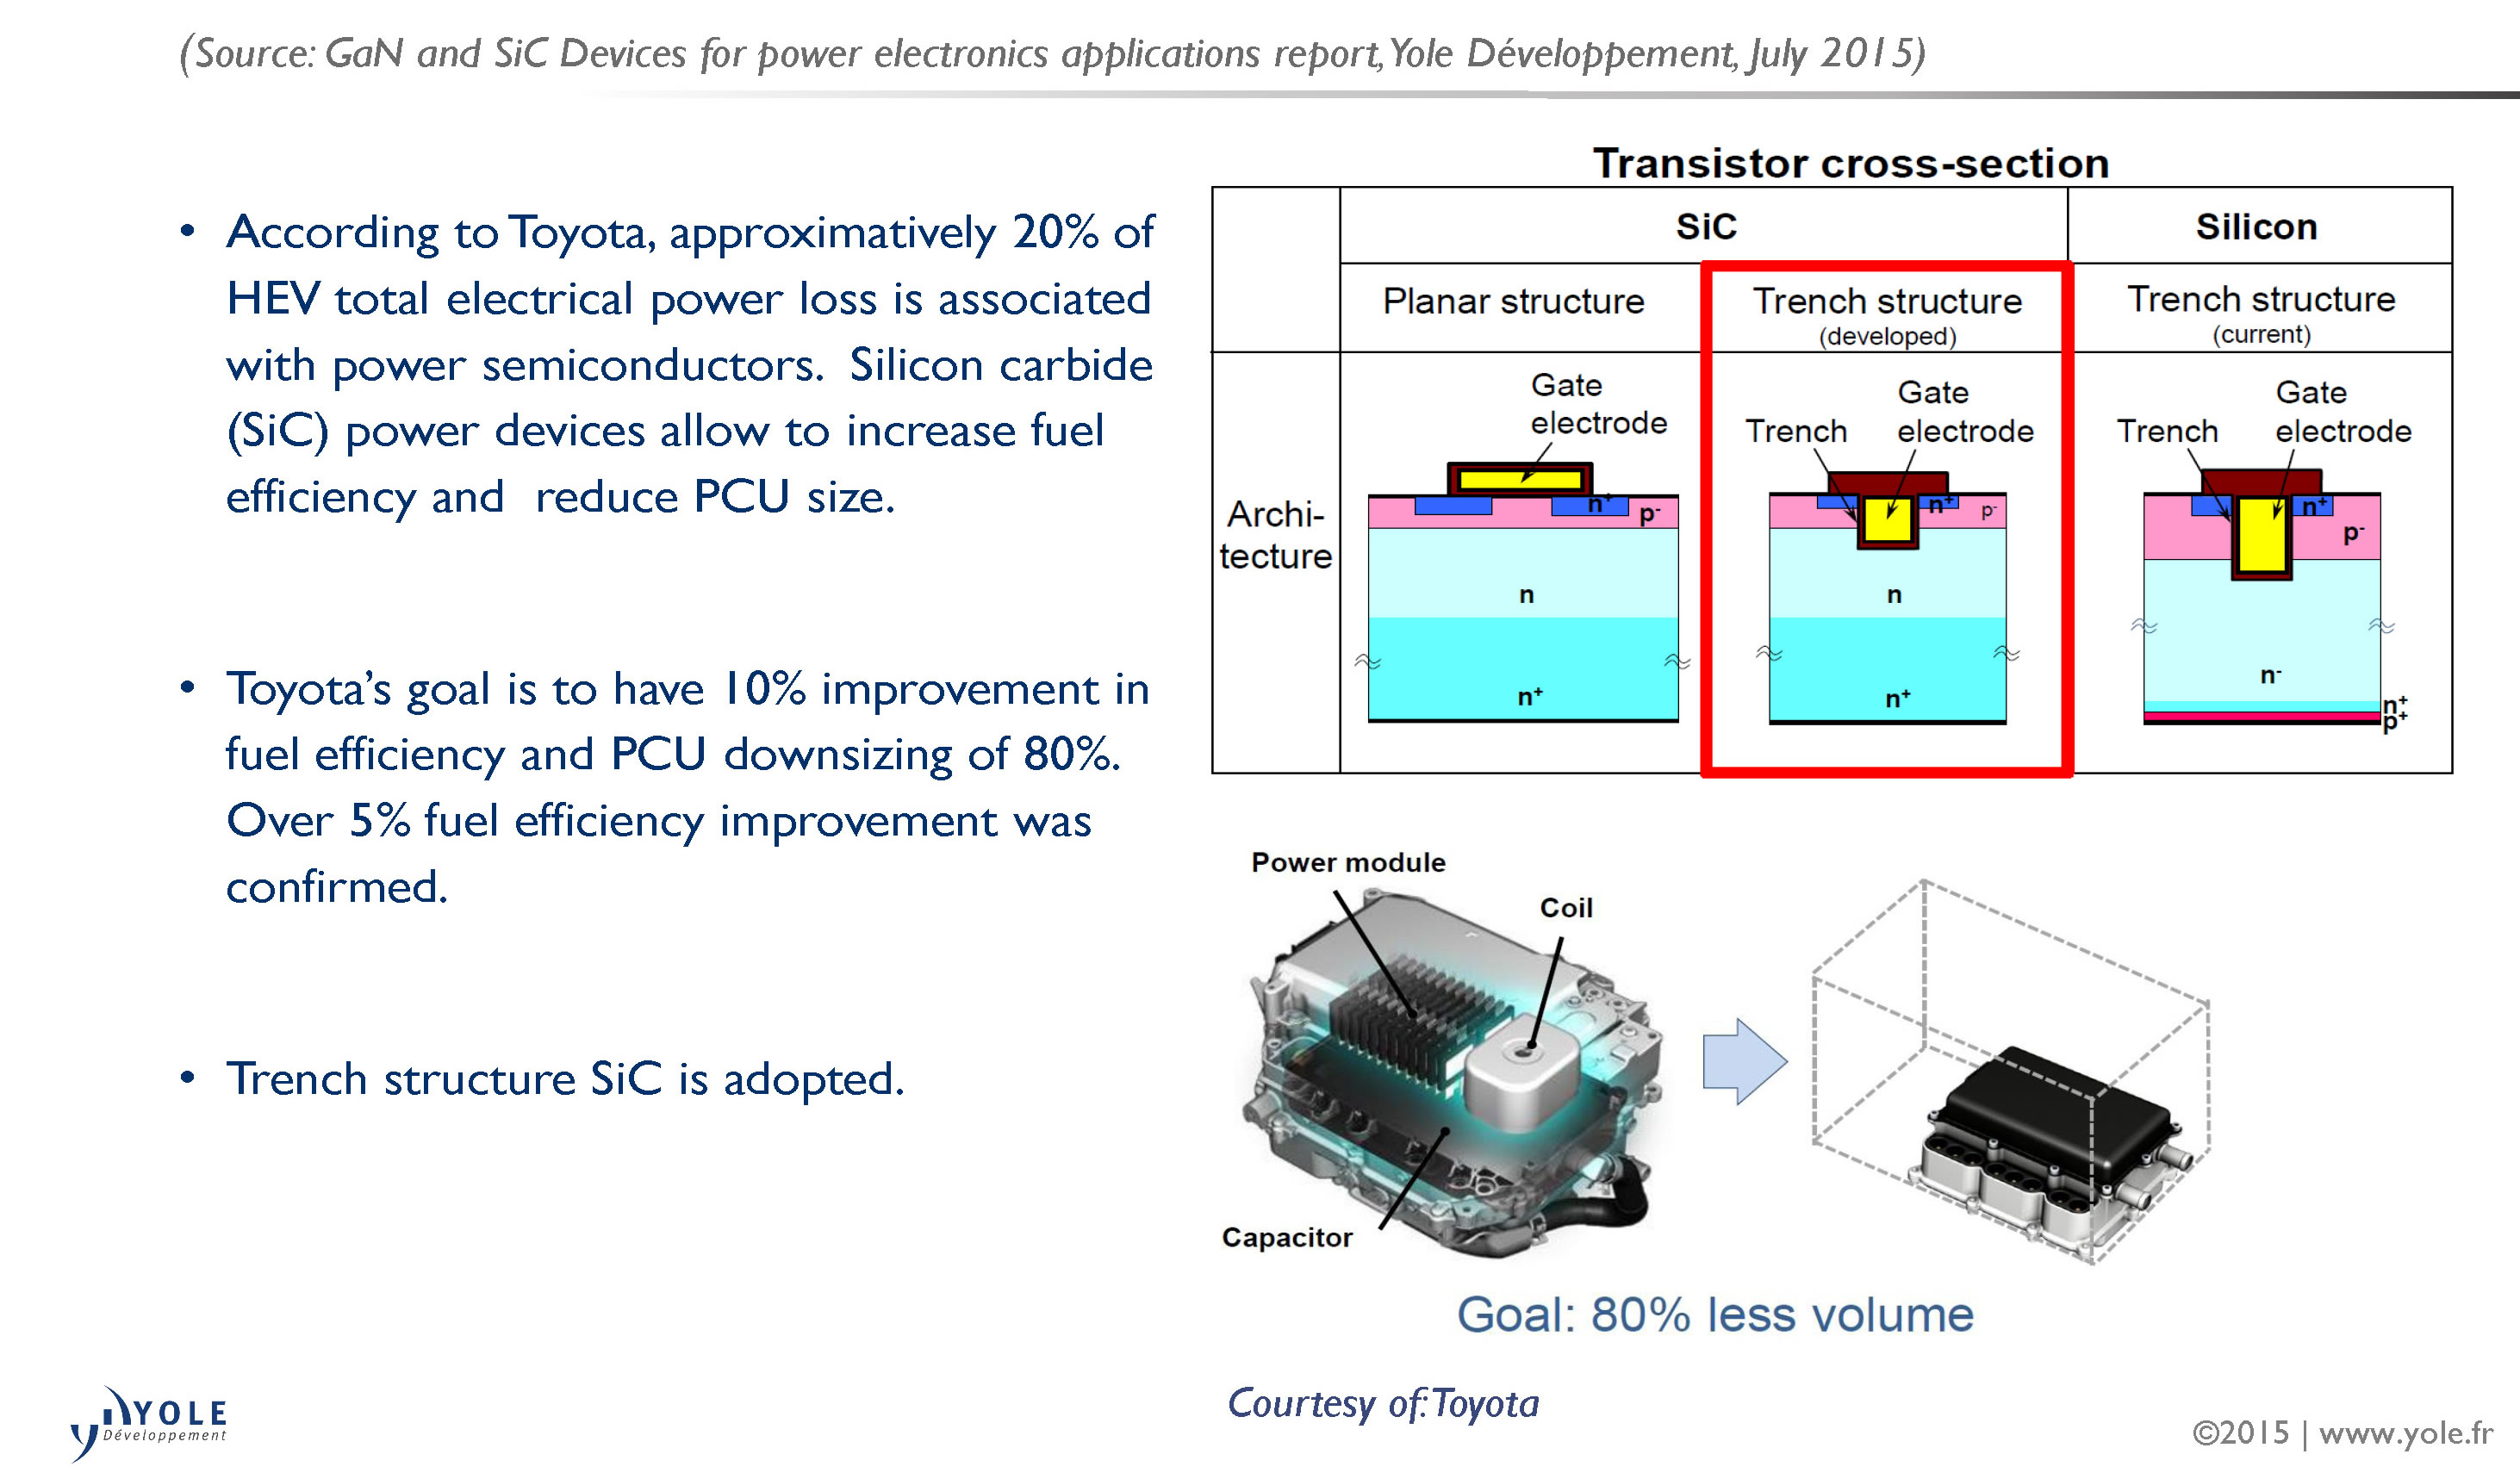 Added value of SiC devices in EV/HEV applications - Toyota's vision